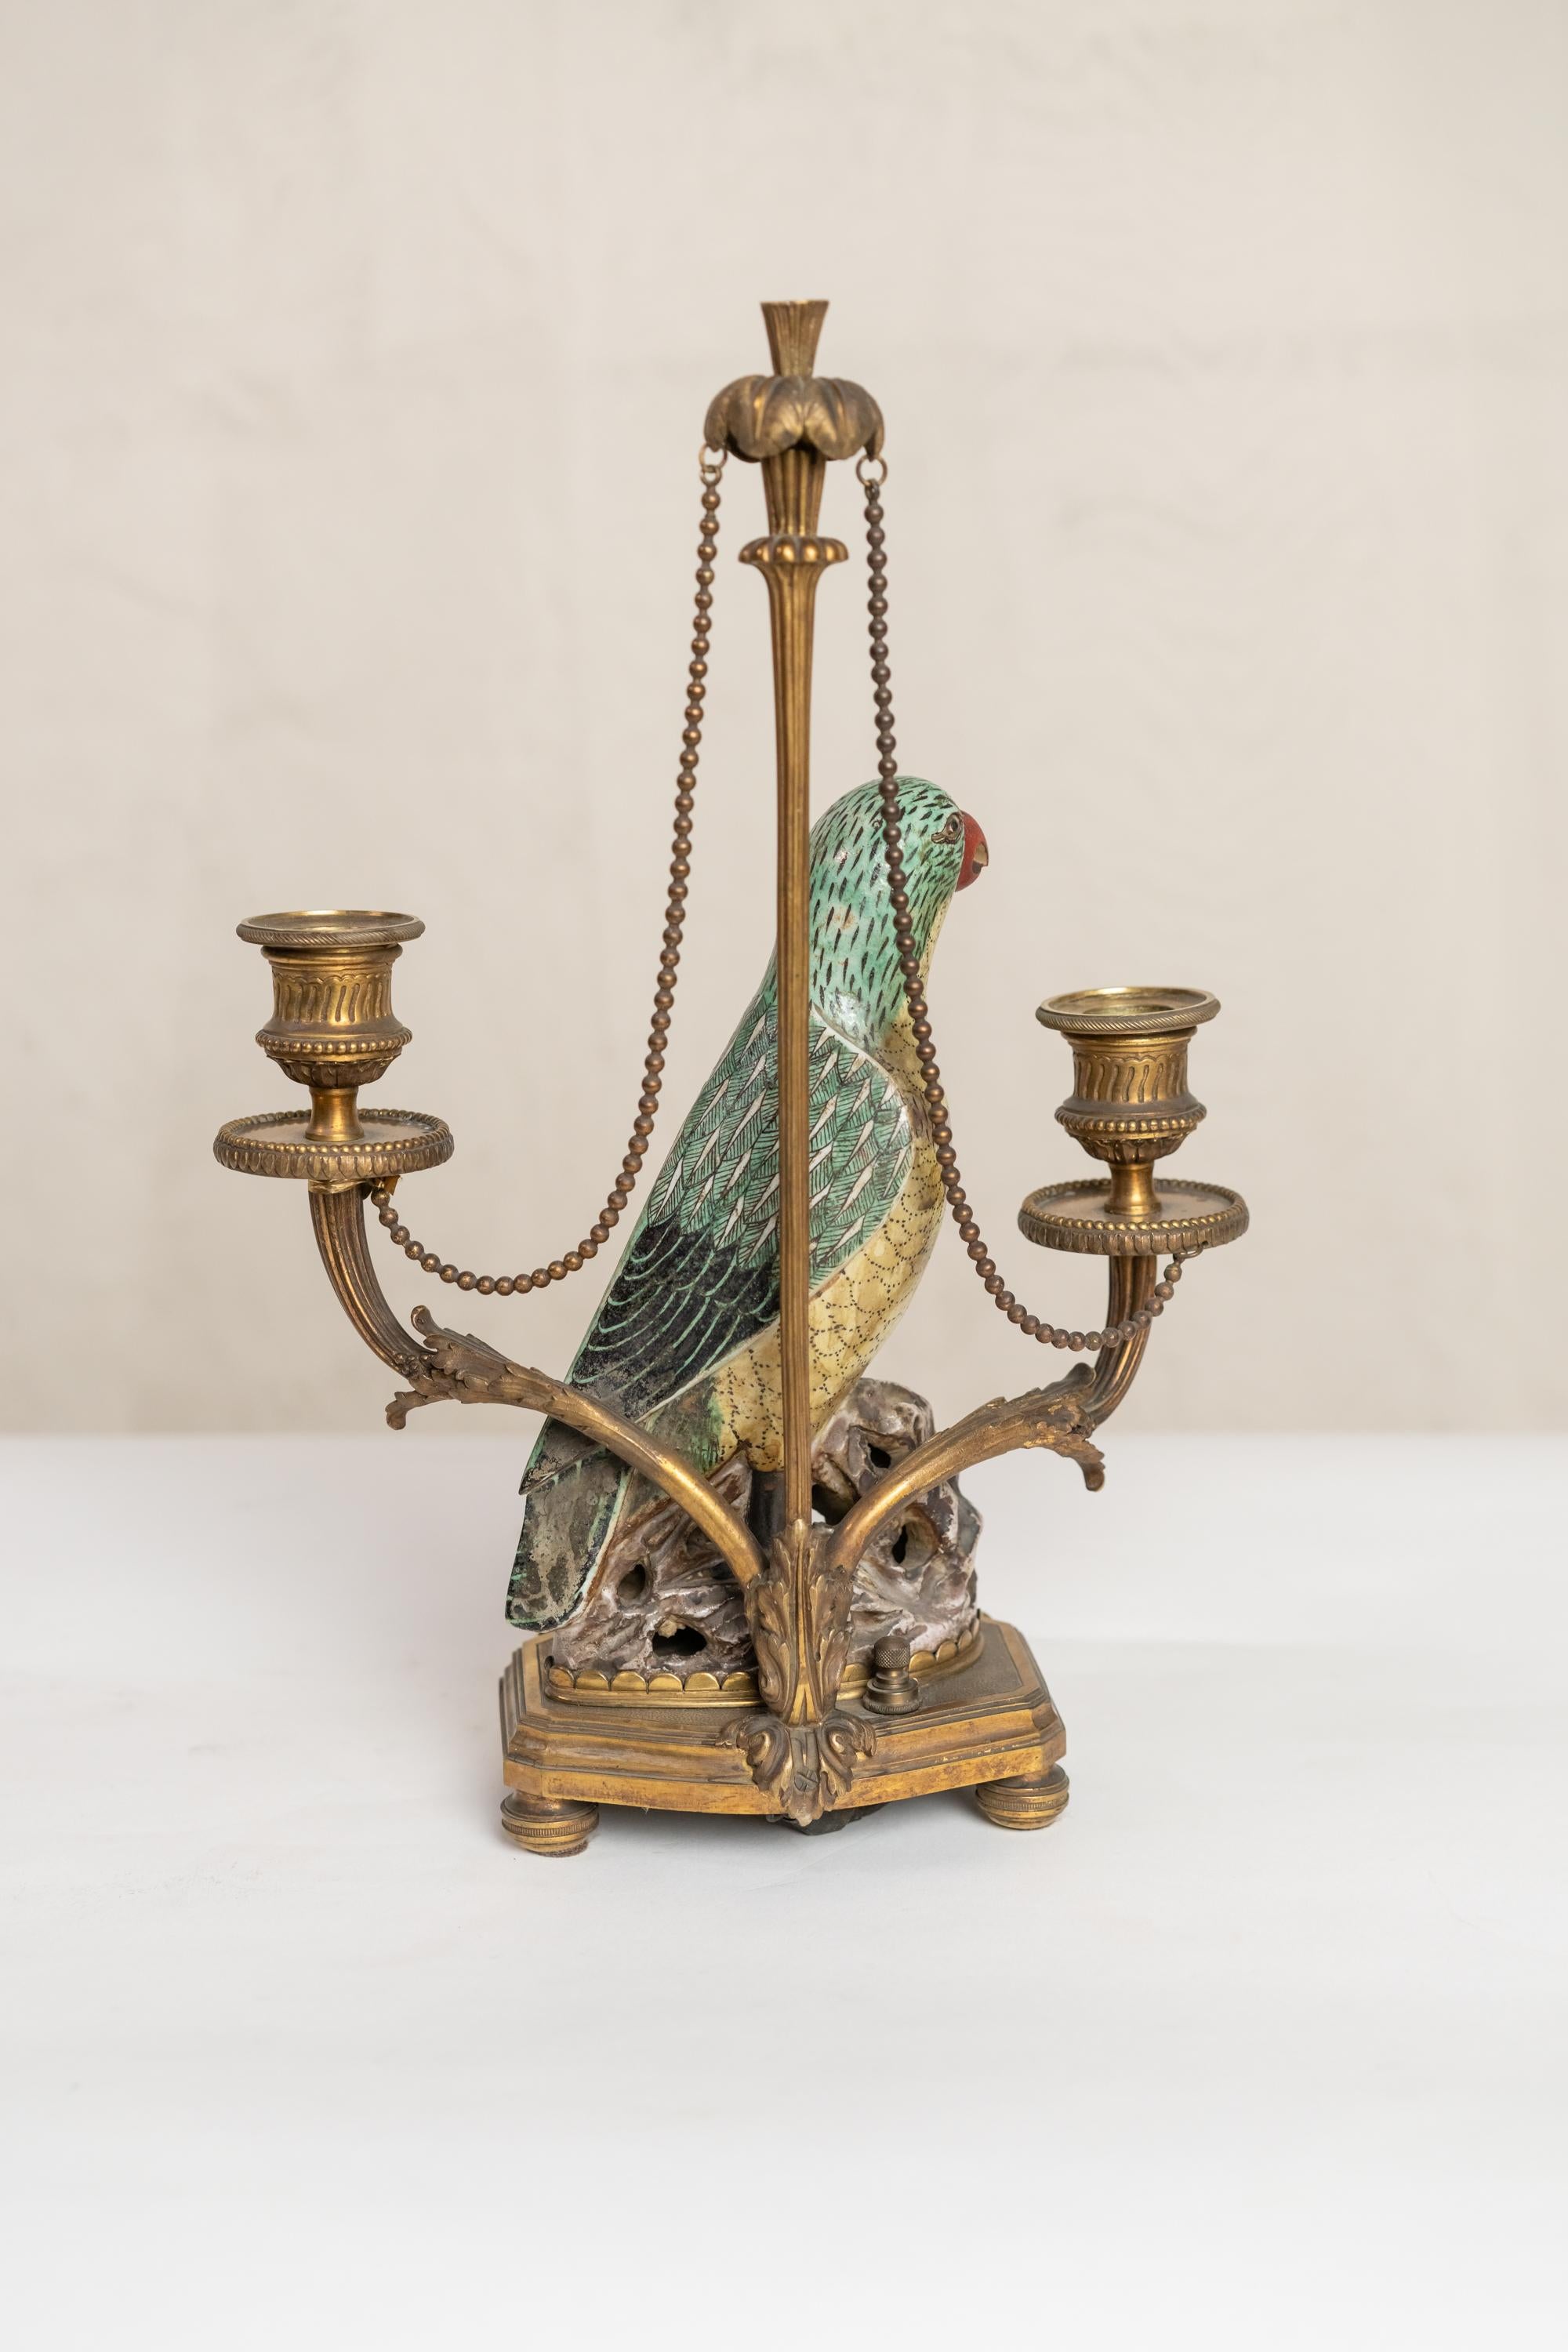 Rare Pair of 18th Century-19th Century Chinese Porcelain Parrots Candelabra For Sale 6